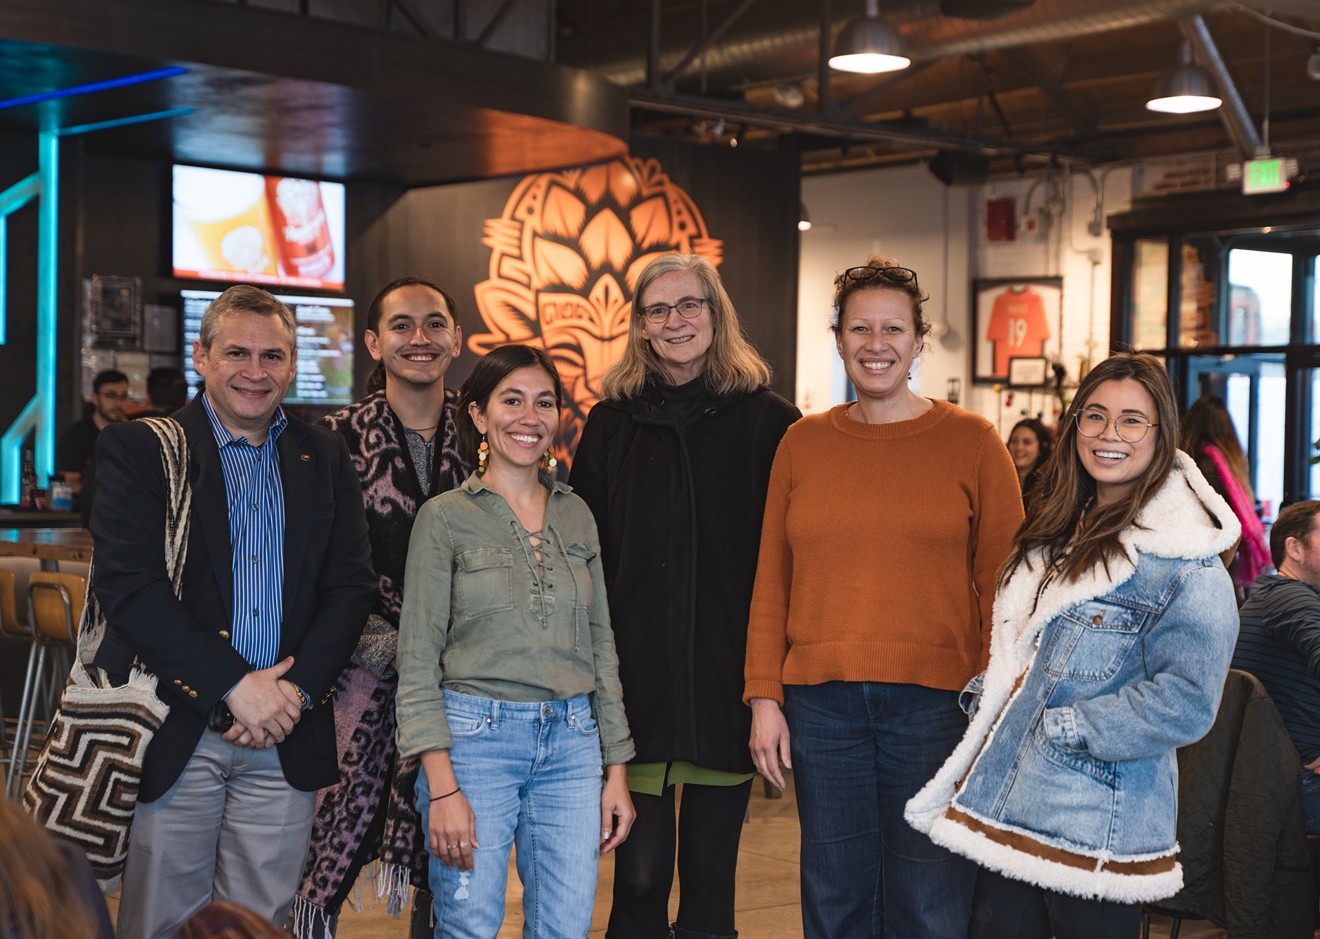 ShopBIPOC team members (from left to right) Antonio Soto, Kevin Hernandez, Sarah Rimmel, Michelle Sturm, Karen Bartlett, and Kanitha Snow at Raíces Brewing Company.